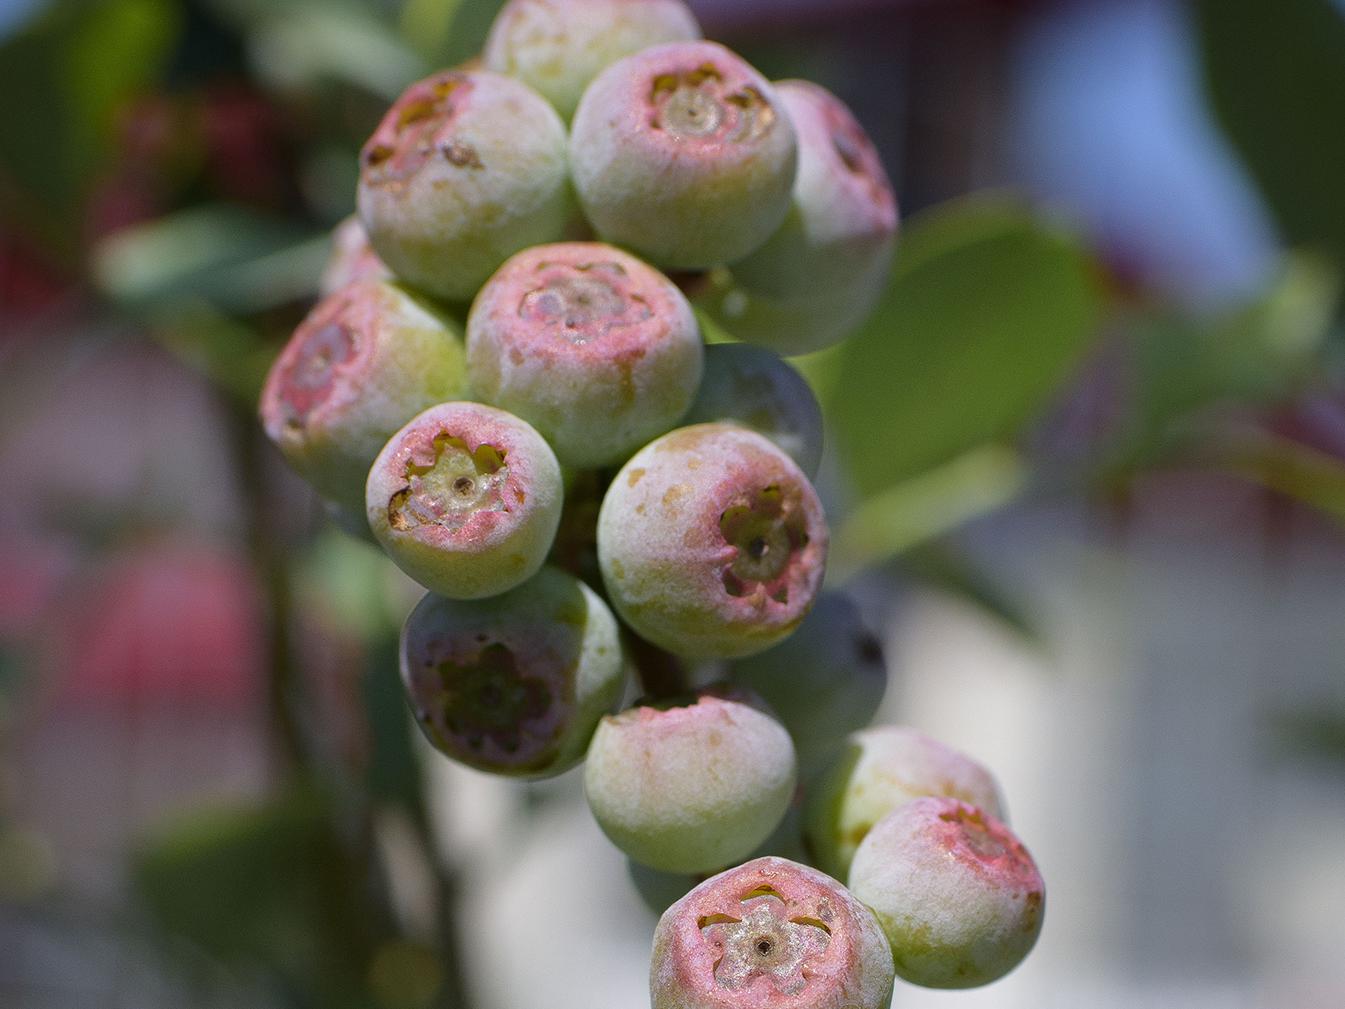 These early stage blueberries are green with a pink center.